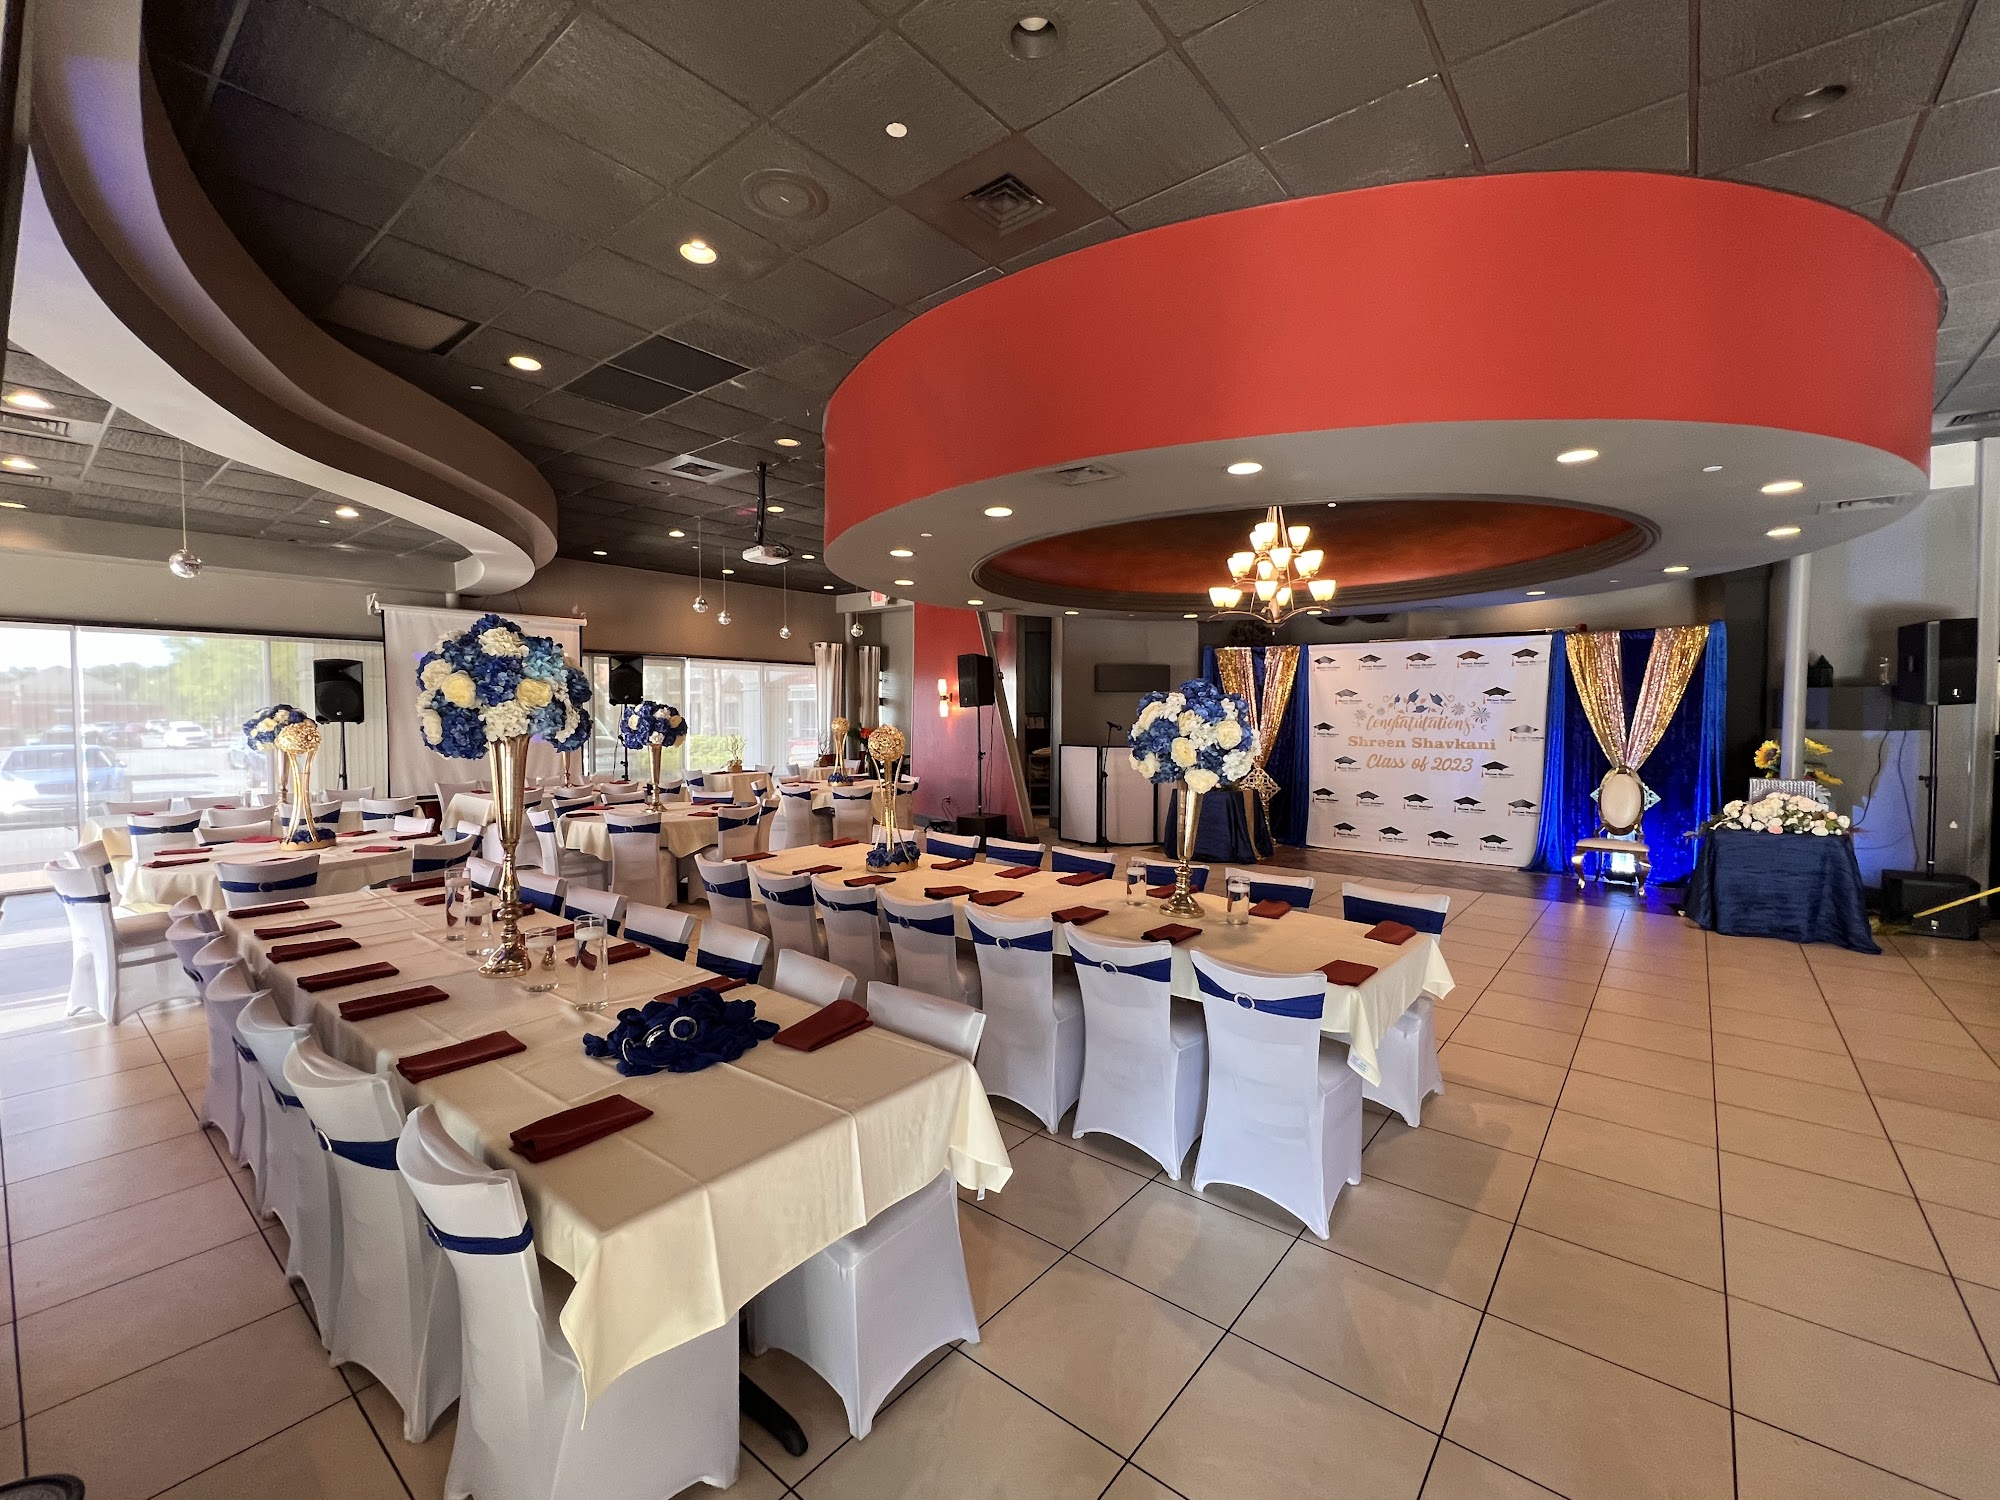 Chef Dinesh Cafe - Indian Cuisine & Banquet Event Hall